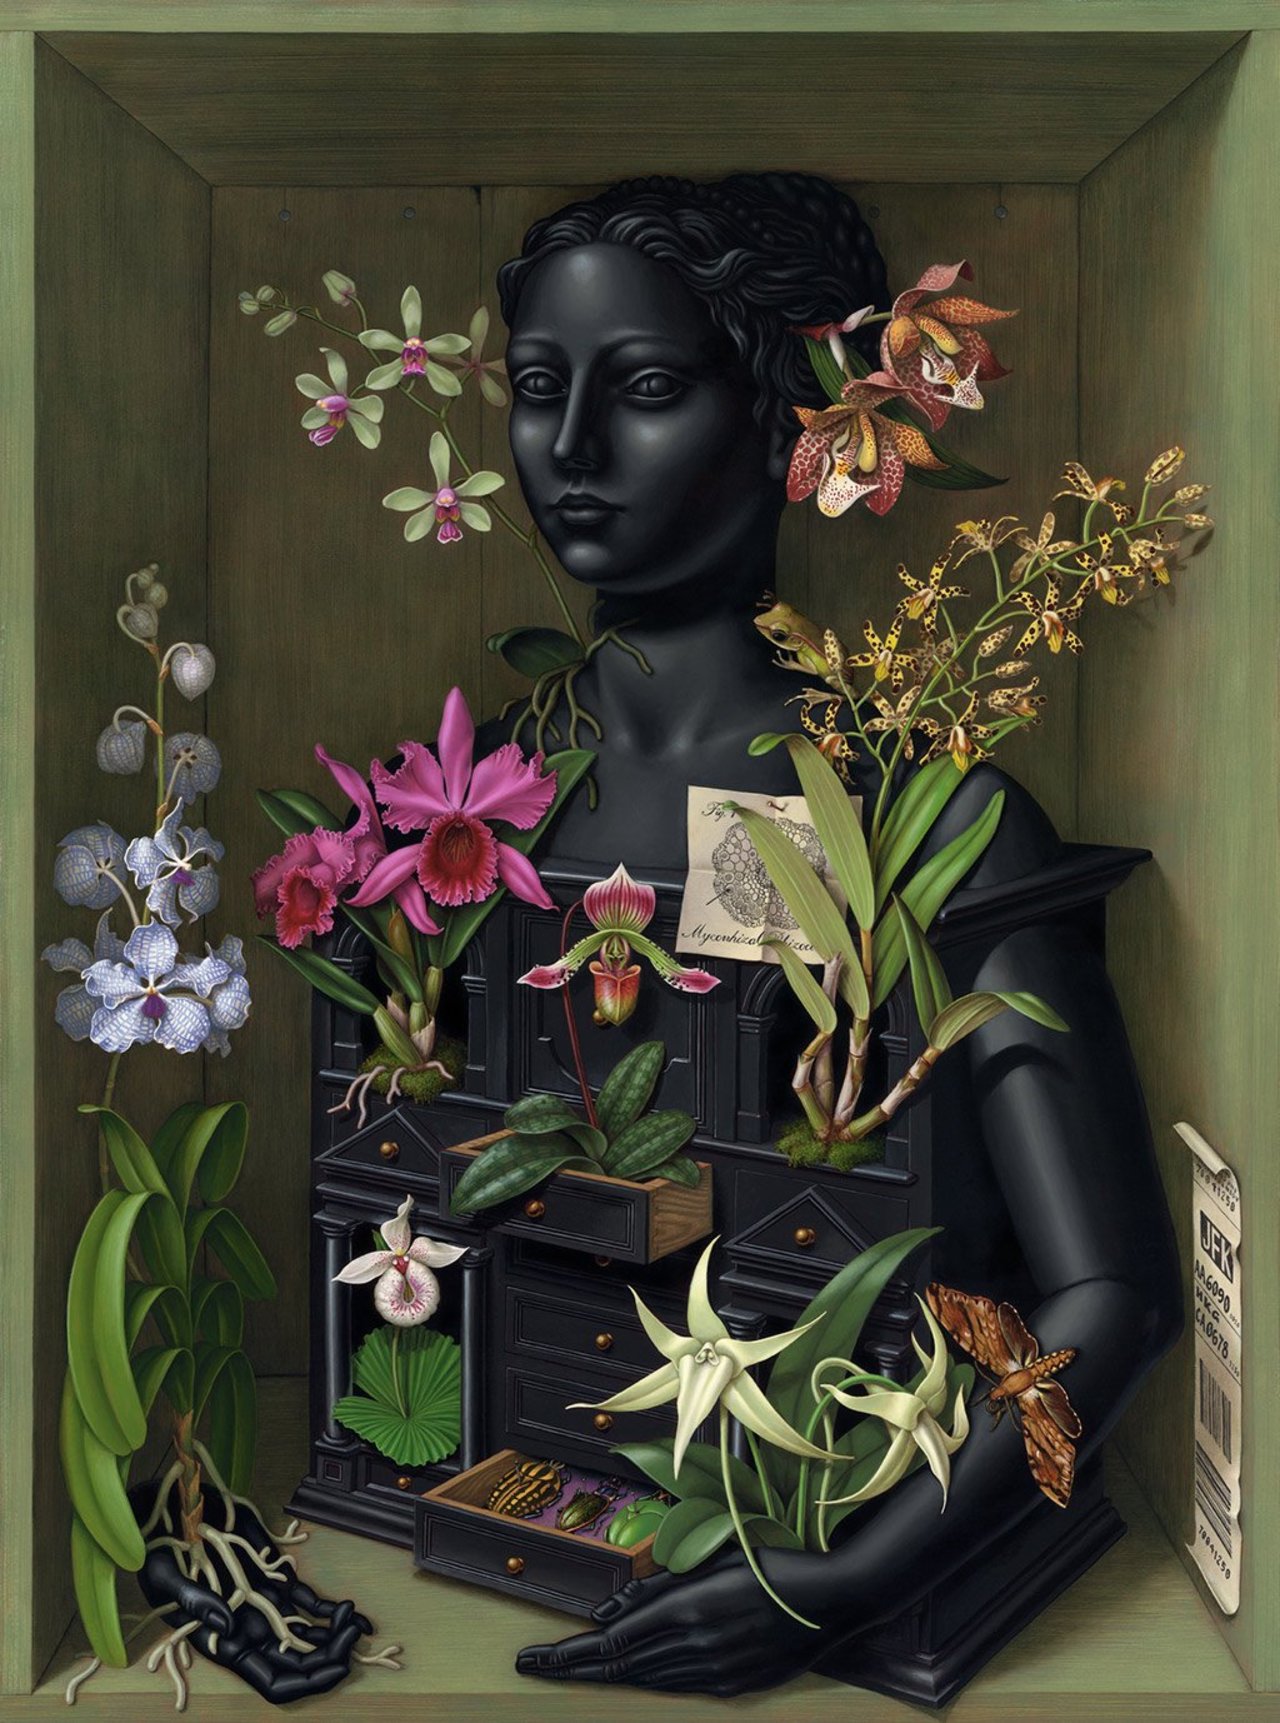 RT @ClaudMang: Orchid CabinetMadeline von Foerster (b.1973)American Artist based in Cologne https://t.co/F1aWXeo4AL